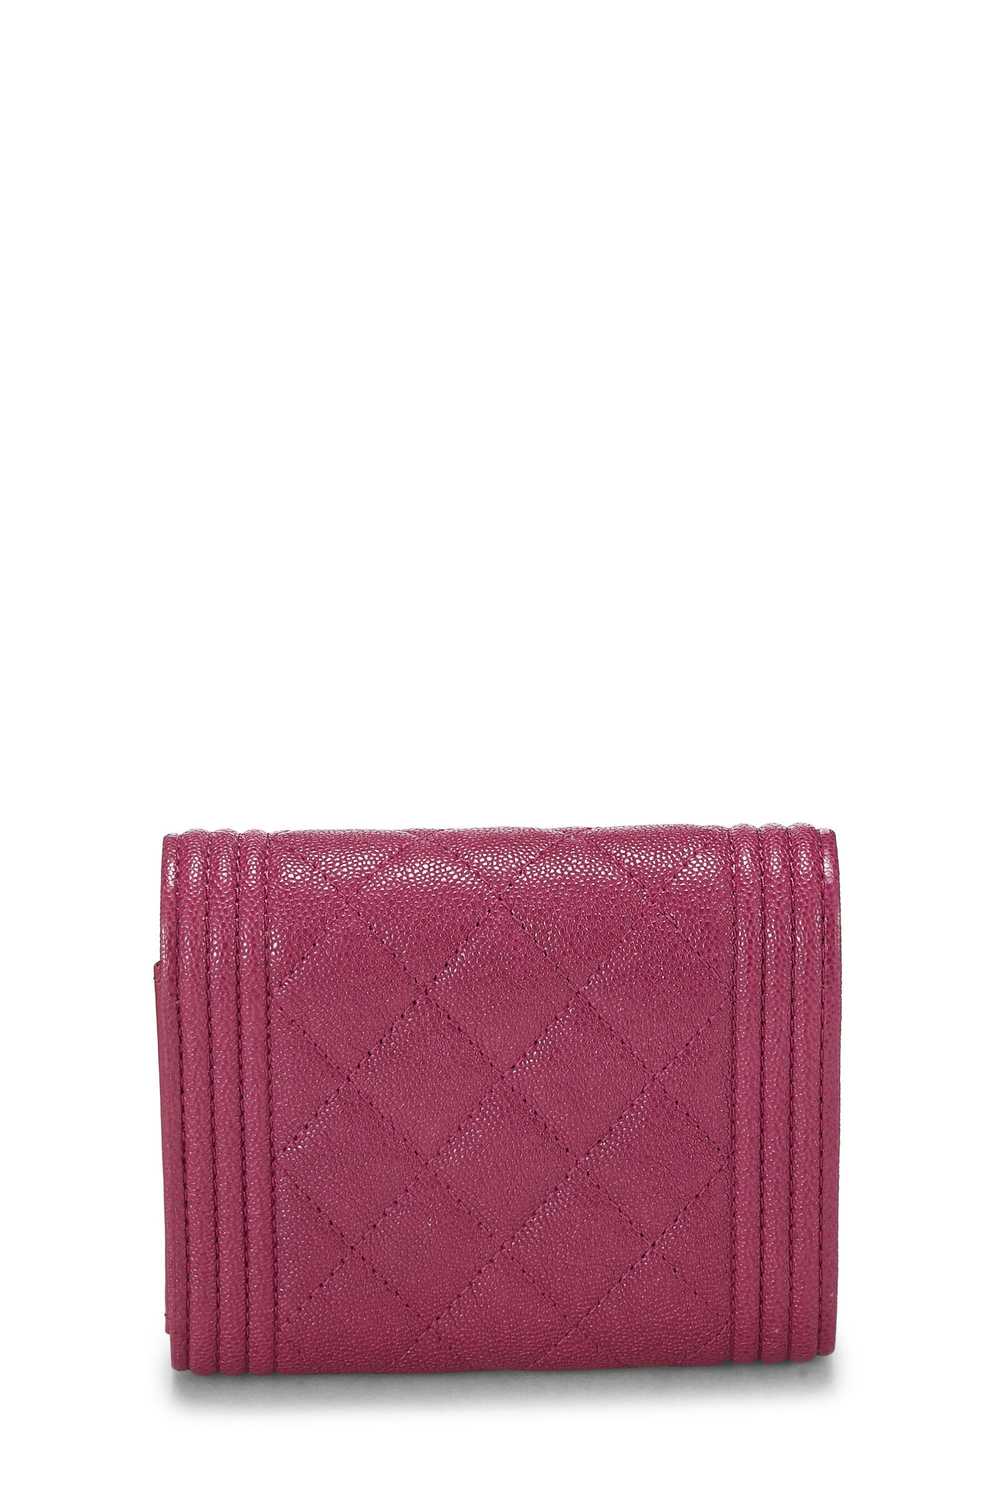 Purple Quilted Caviar Boy Compact Wallet - image 3